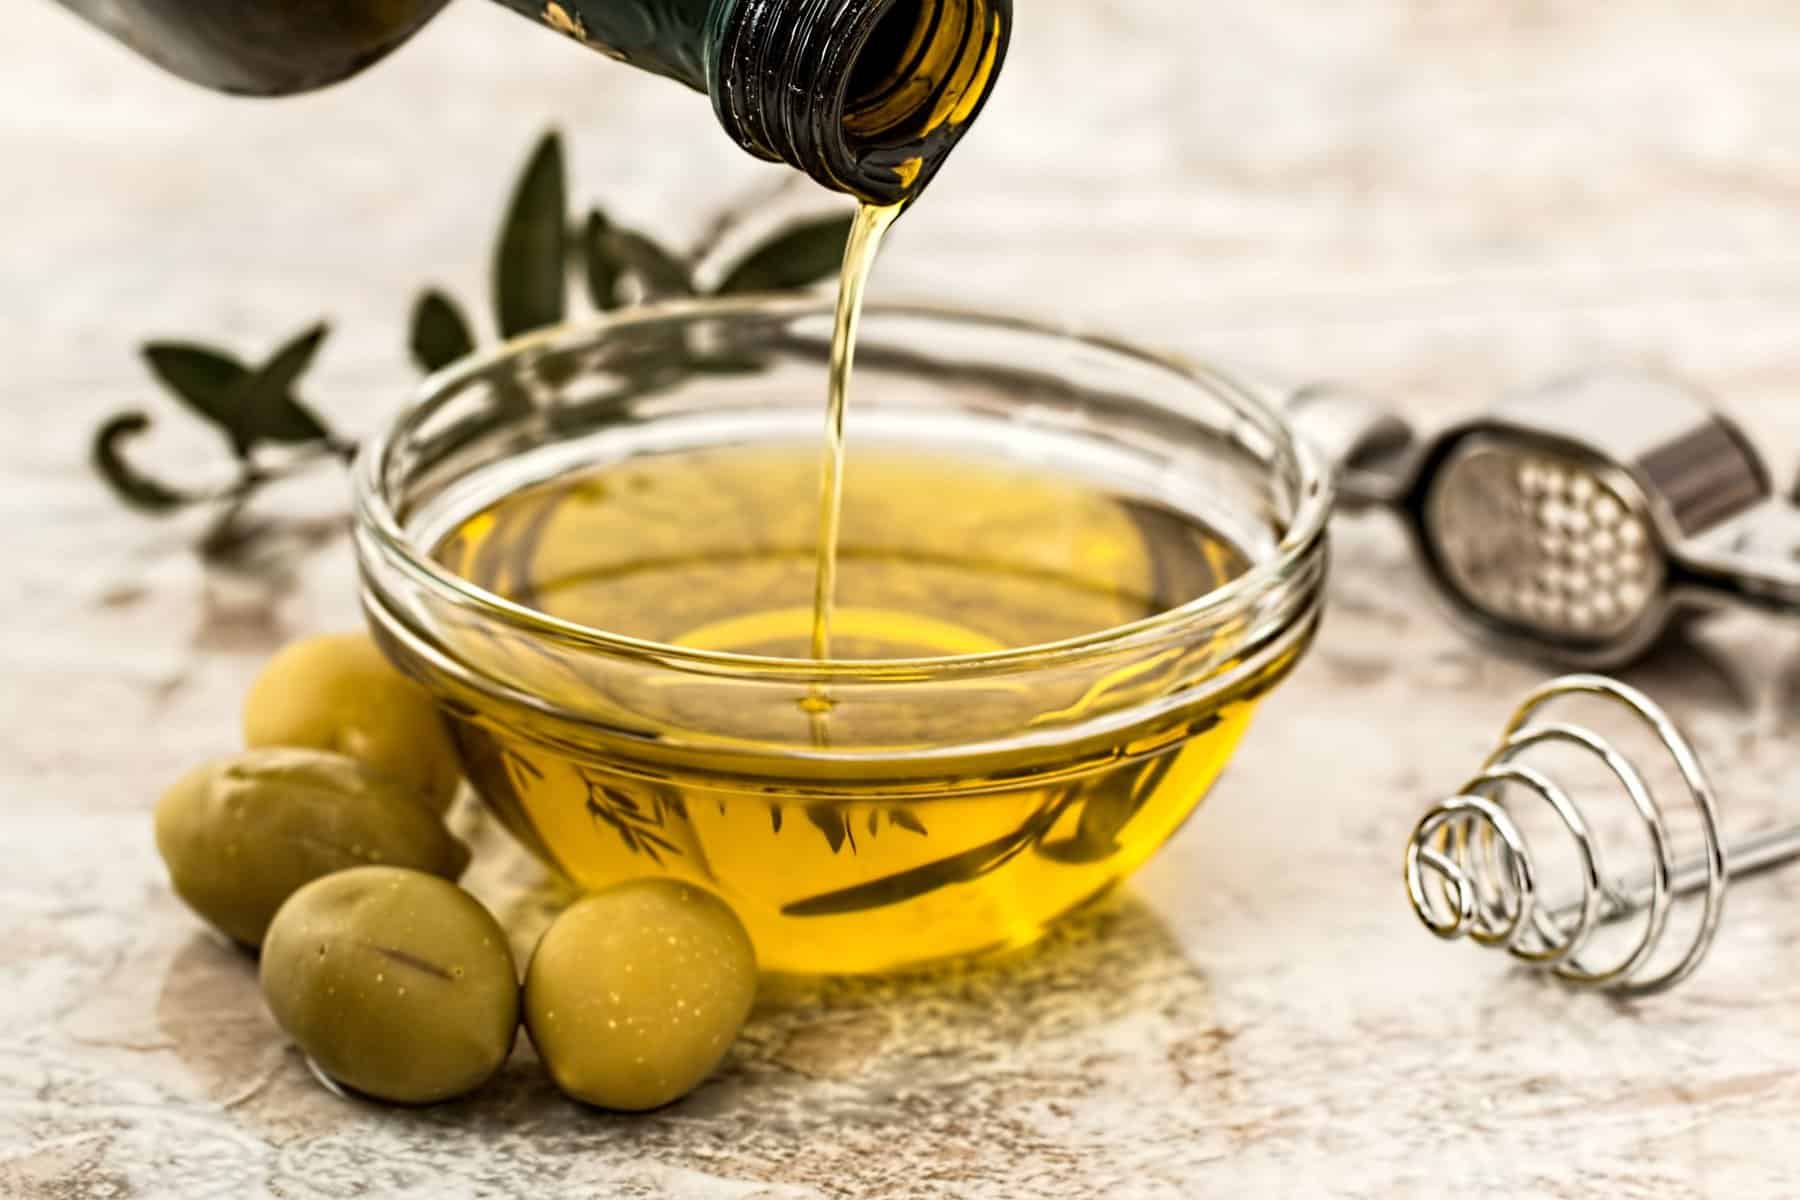 Healthy fat – Olive oil bring poured into small ramekin with olives surrounding the scene